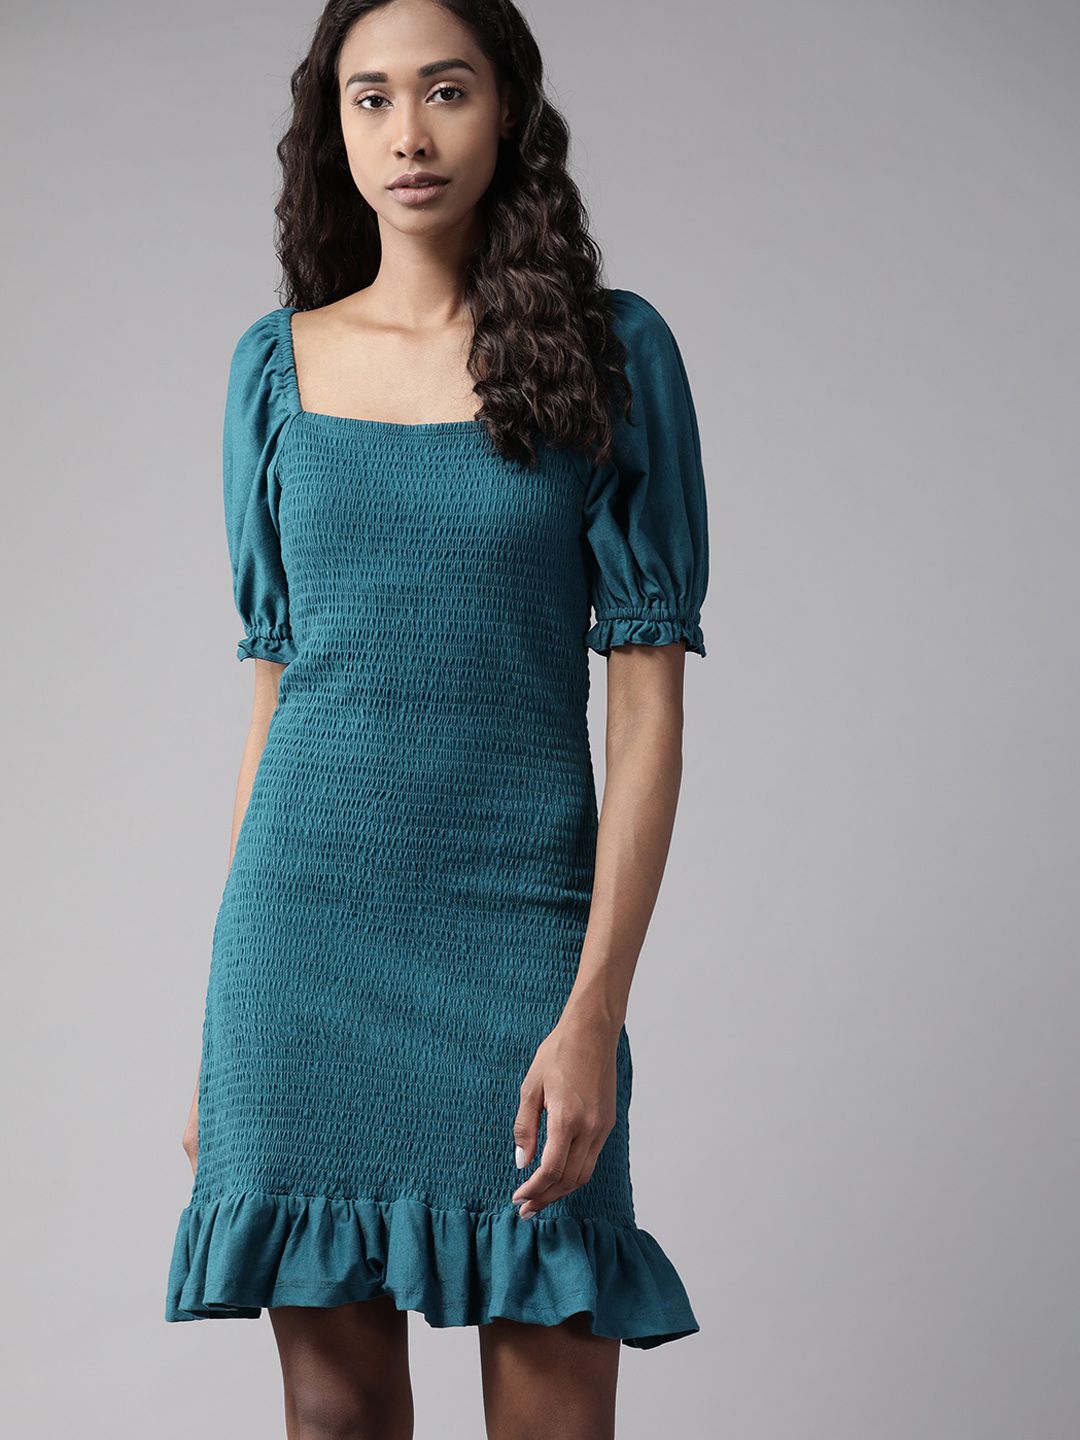 Roadster Women Tranquil Teal Solid Volume Play Dress Price in India